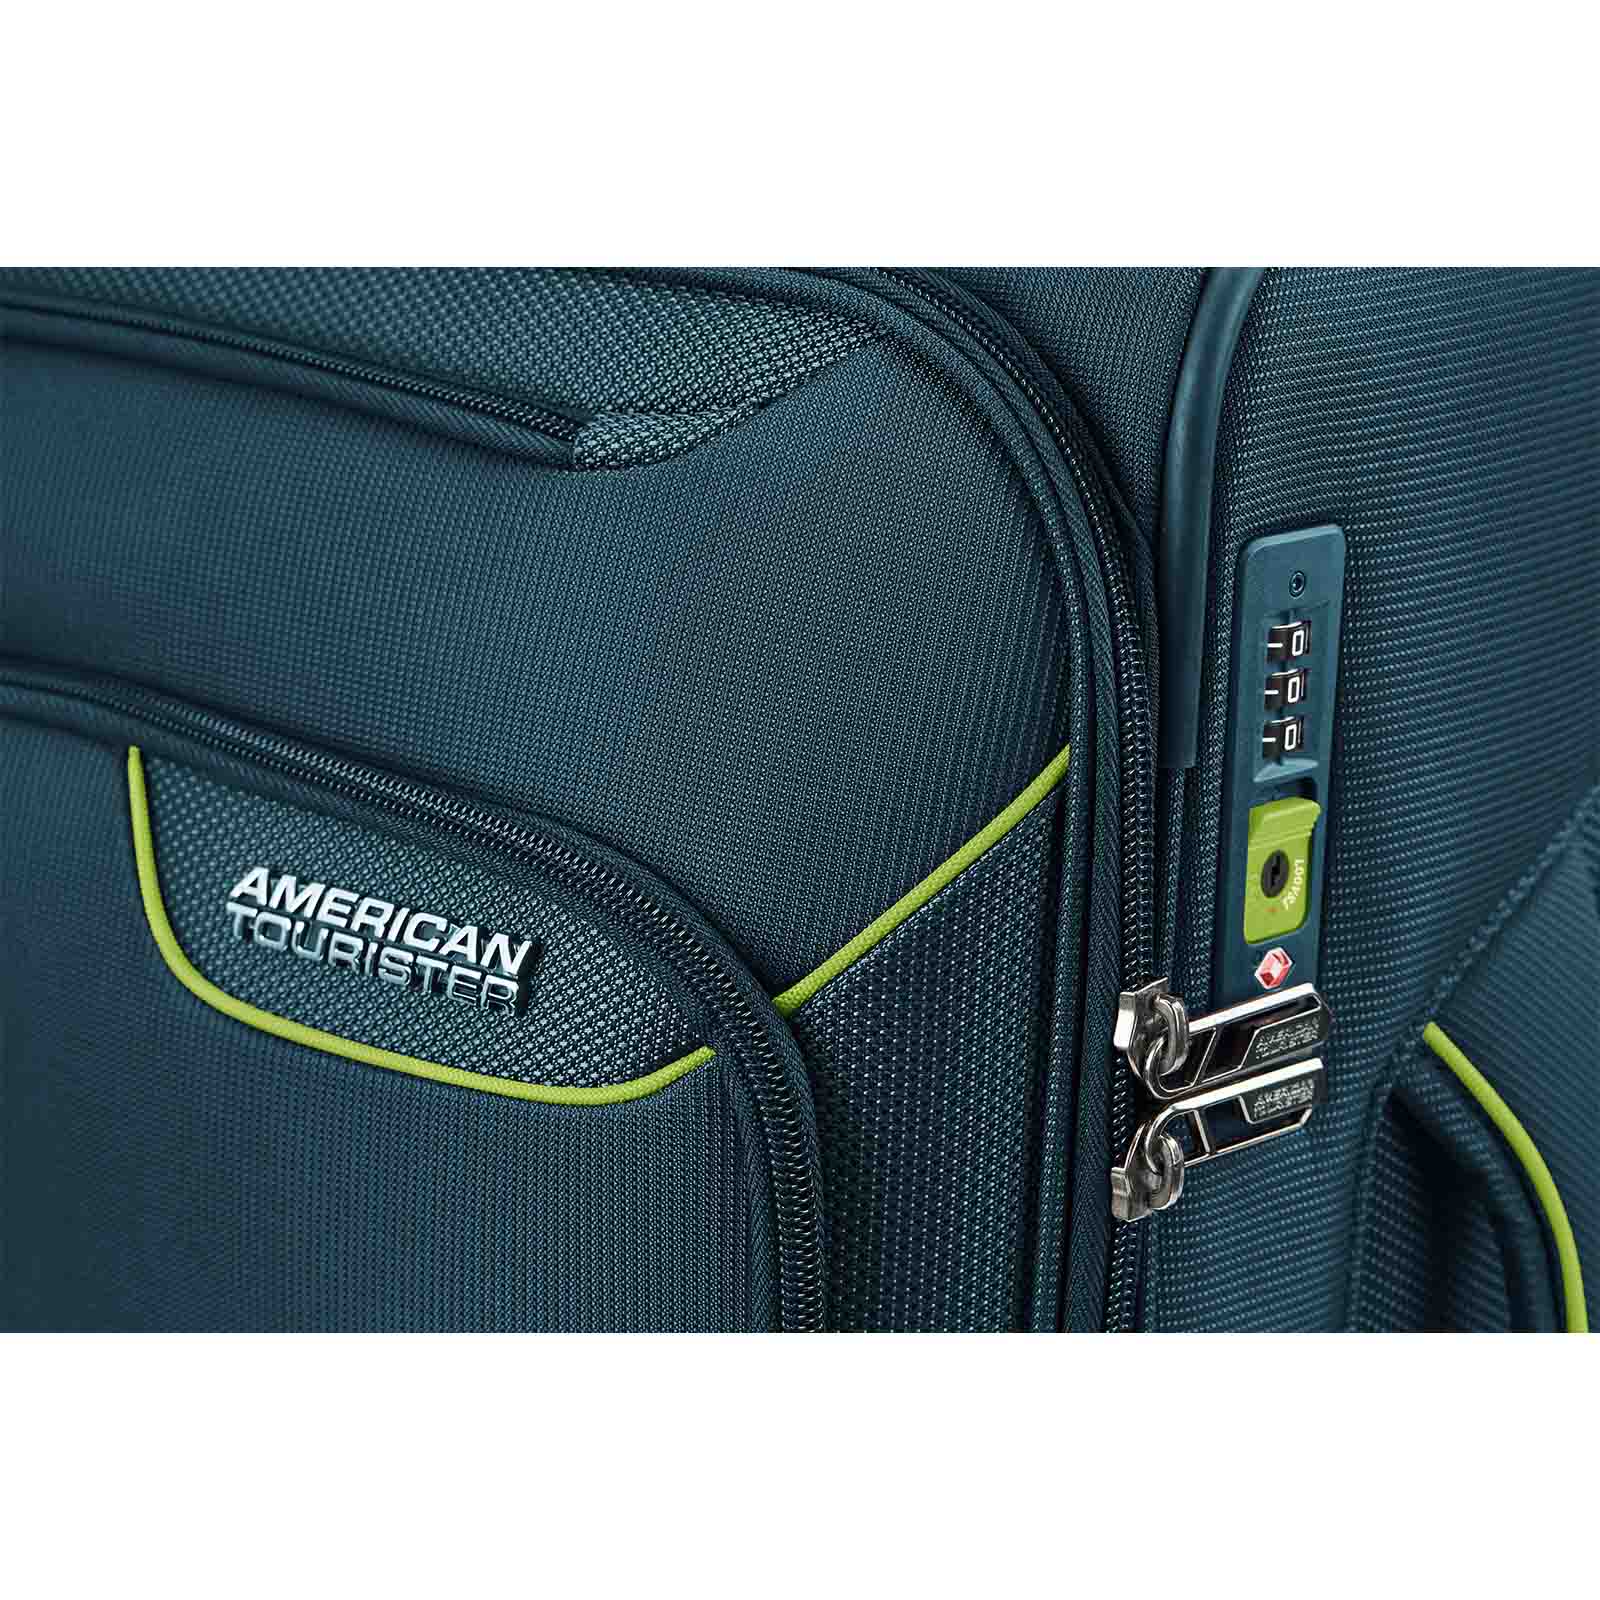 American-Tourister-Applite-4-Eco-50cm-Carry-On-Suitcase-Varsity-Green-Lock